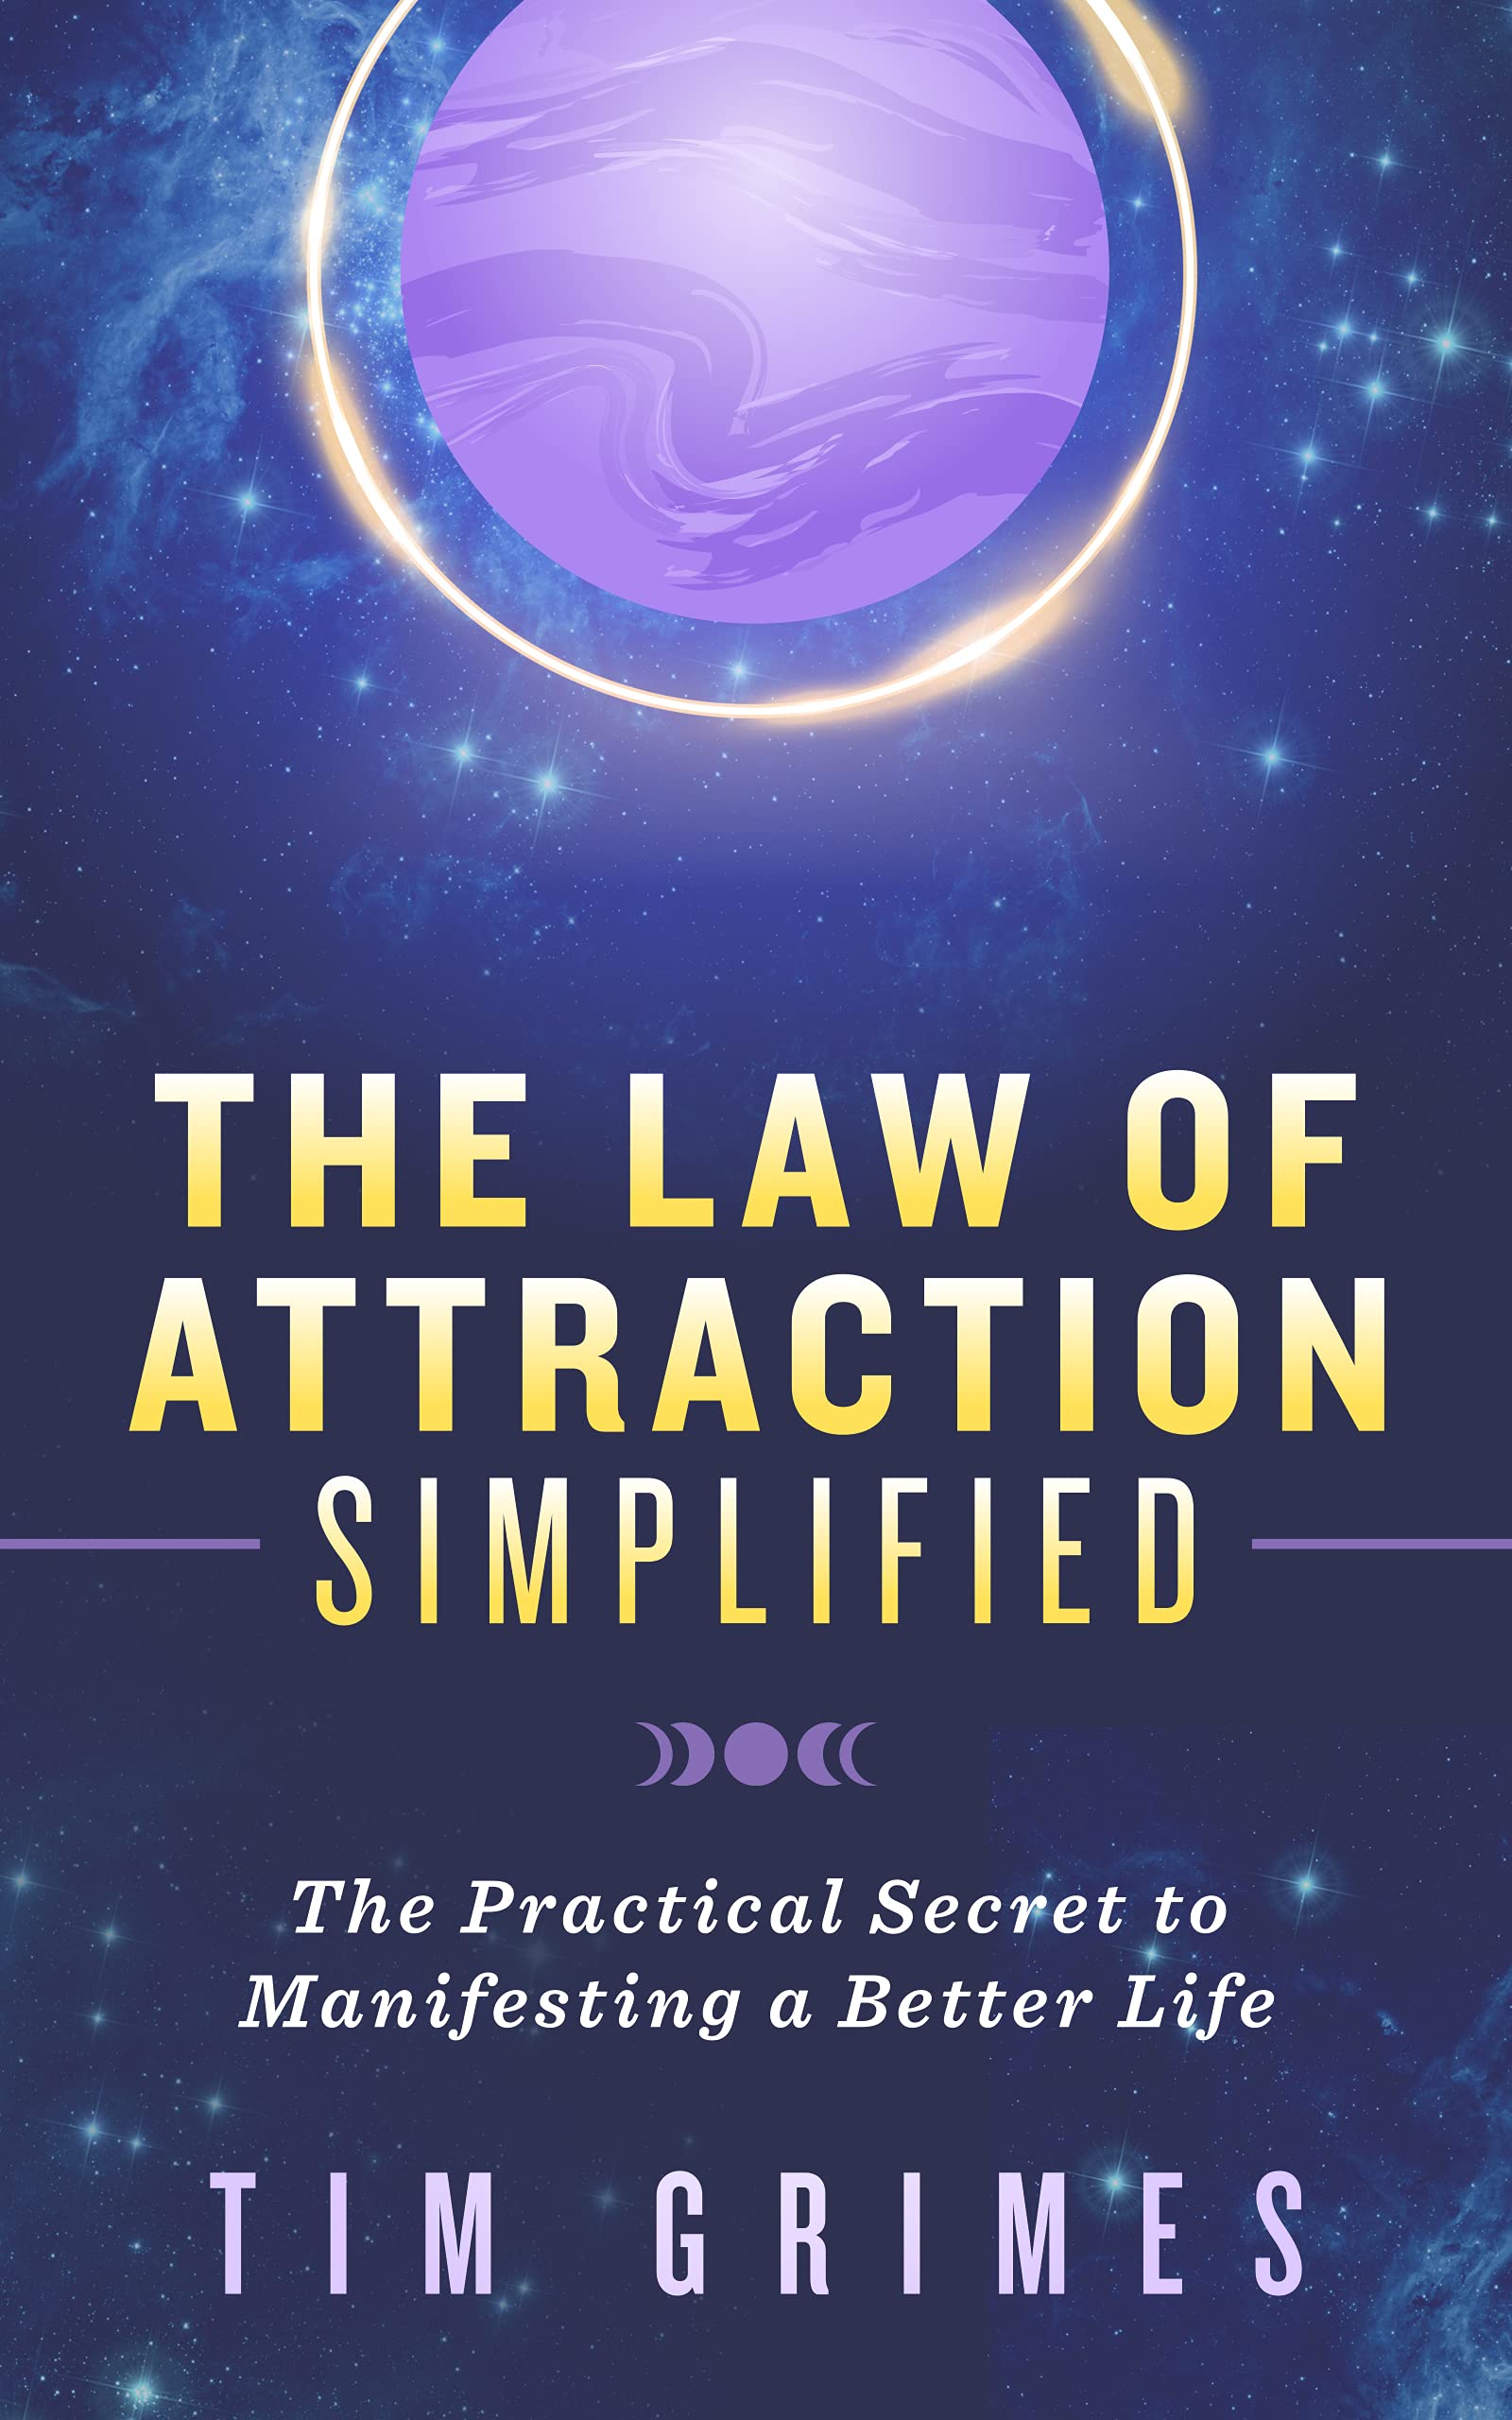 The Law of Attraction Simplified